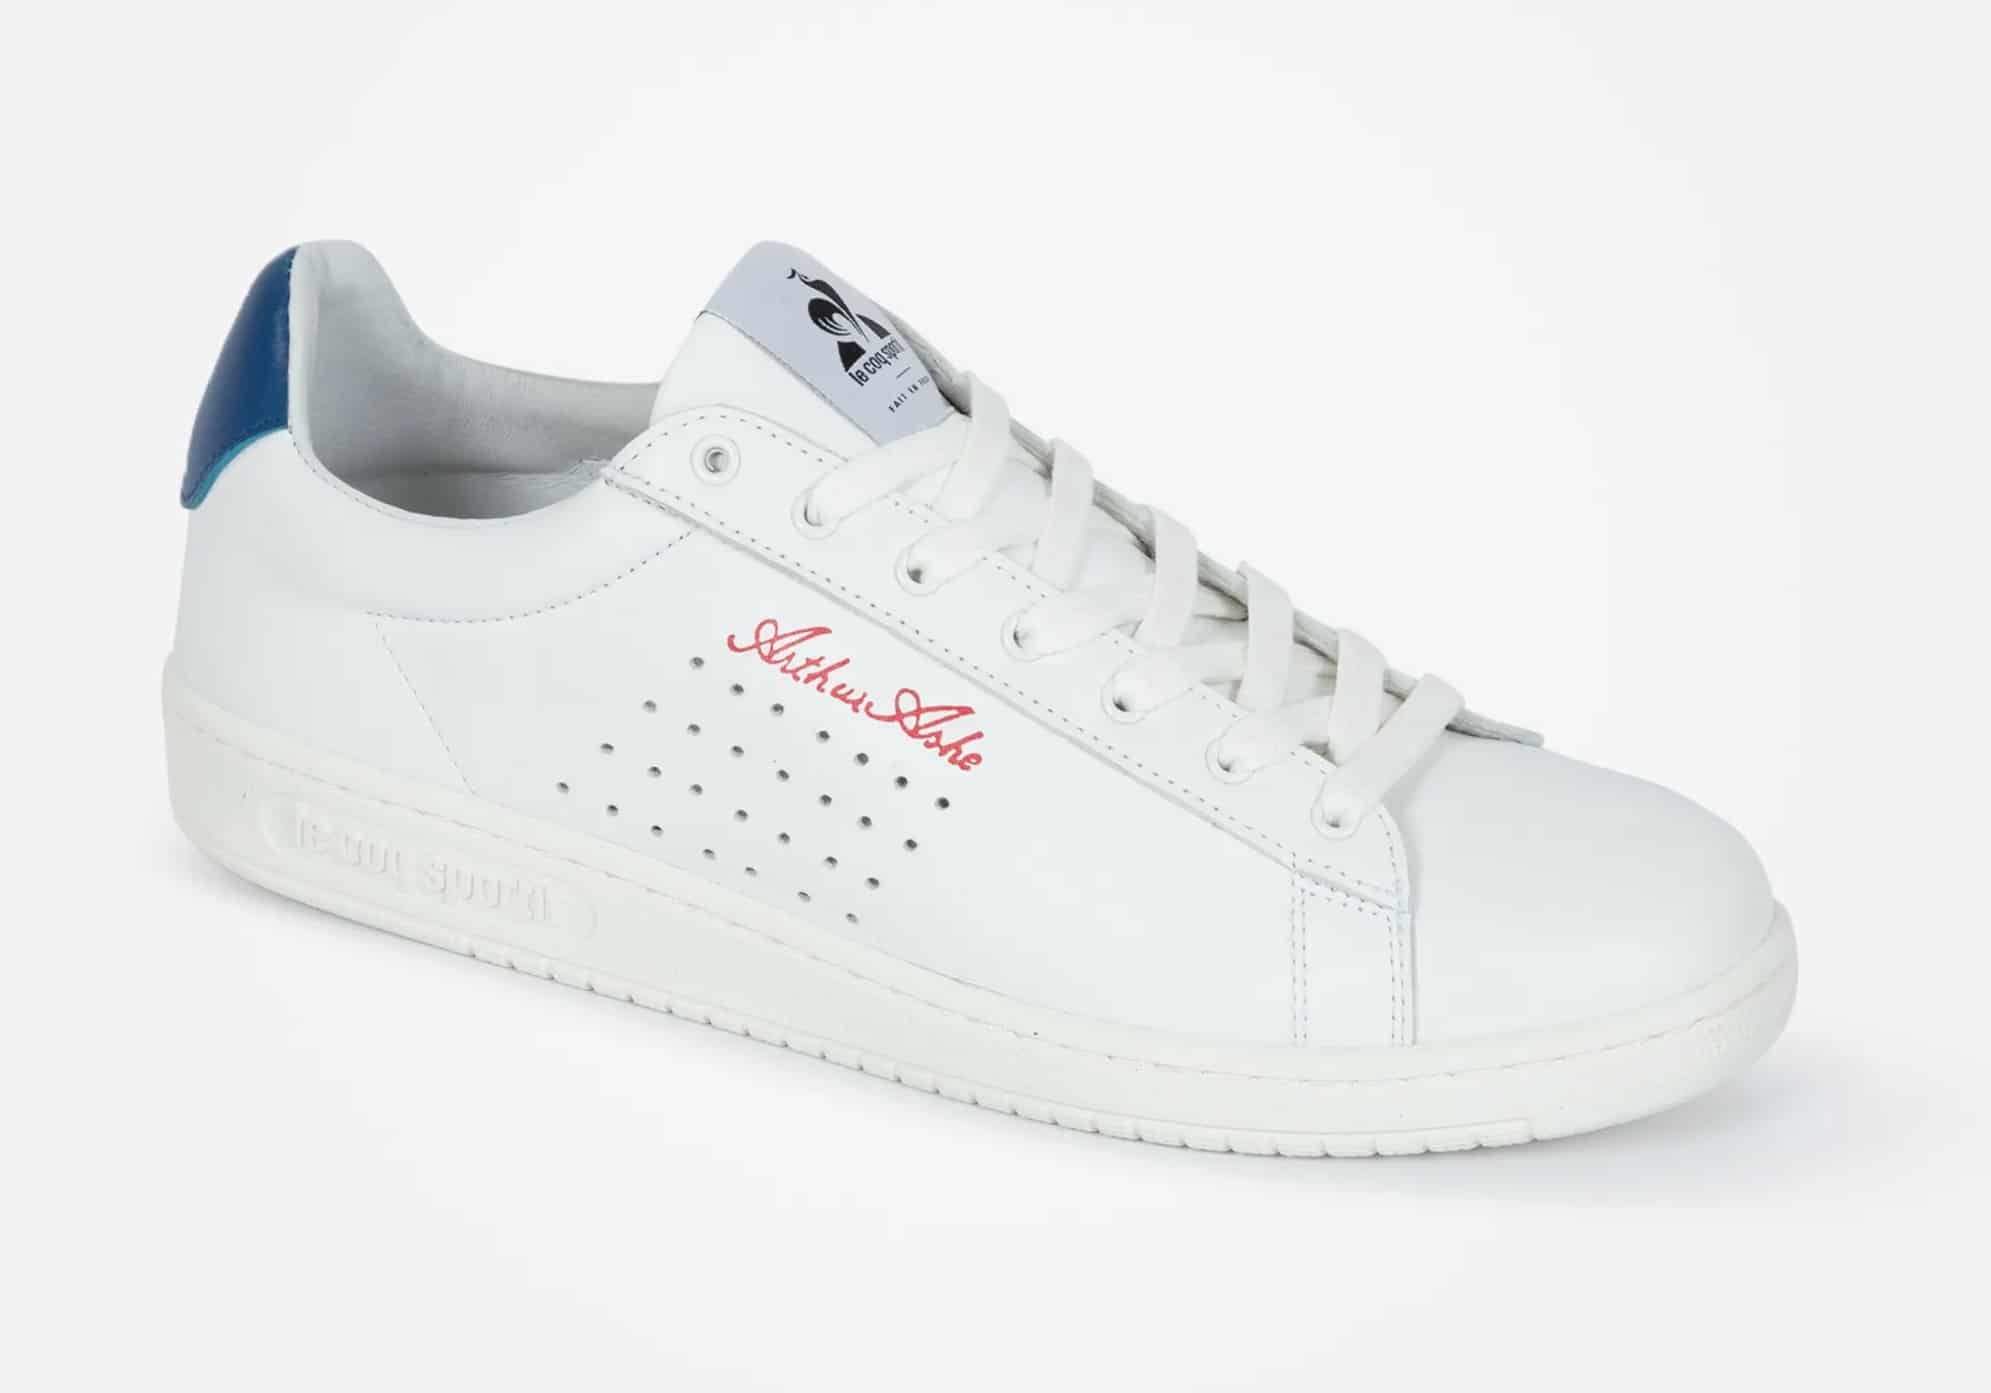 Men's white trainers 2022 - Le Coq Sportif Arthur Ashe Made in France